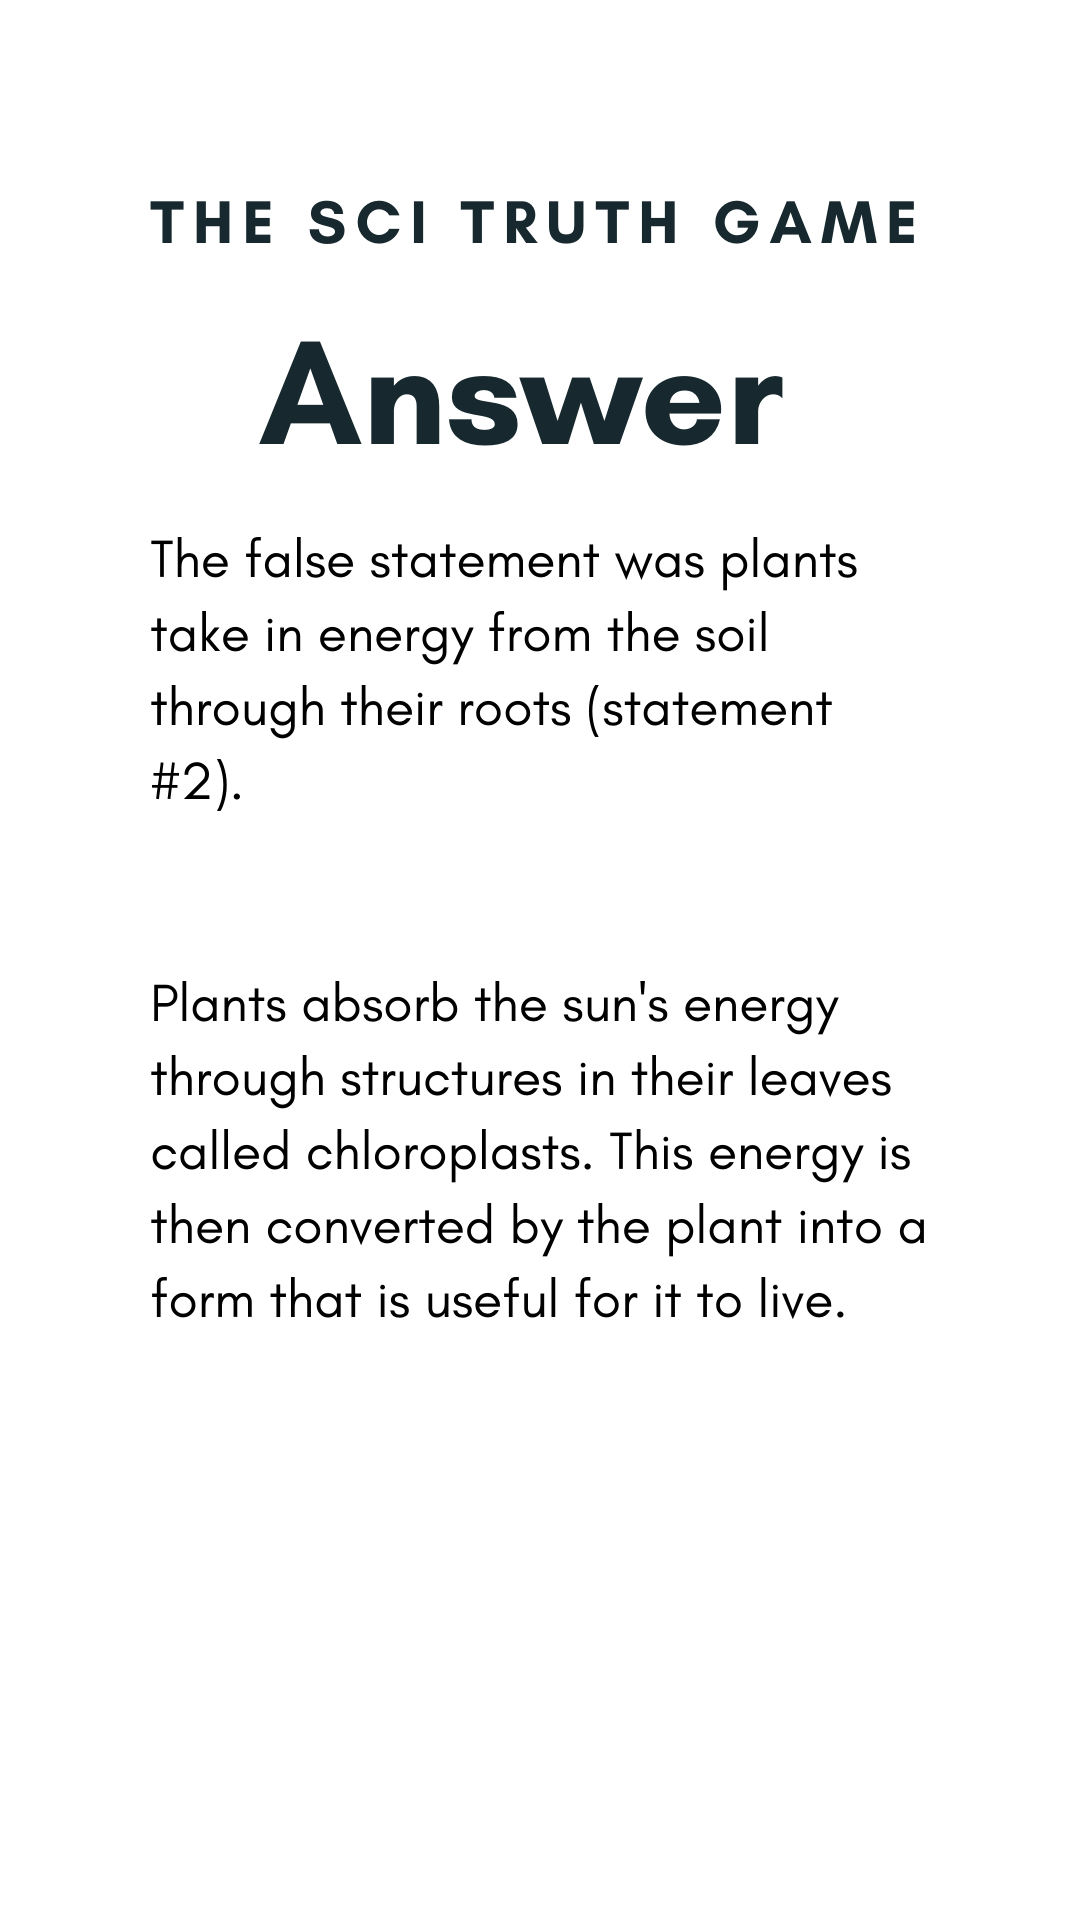 The false statement was plants take in energy from the soil through their roots (statement #2). Plants absorb the sun's energy through structures in their leaves called chloroplasts. This energy is then converted by the plant into a form that is useful for it to live.